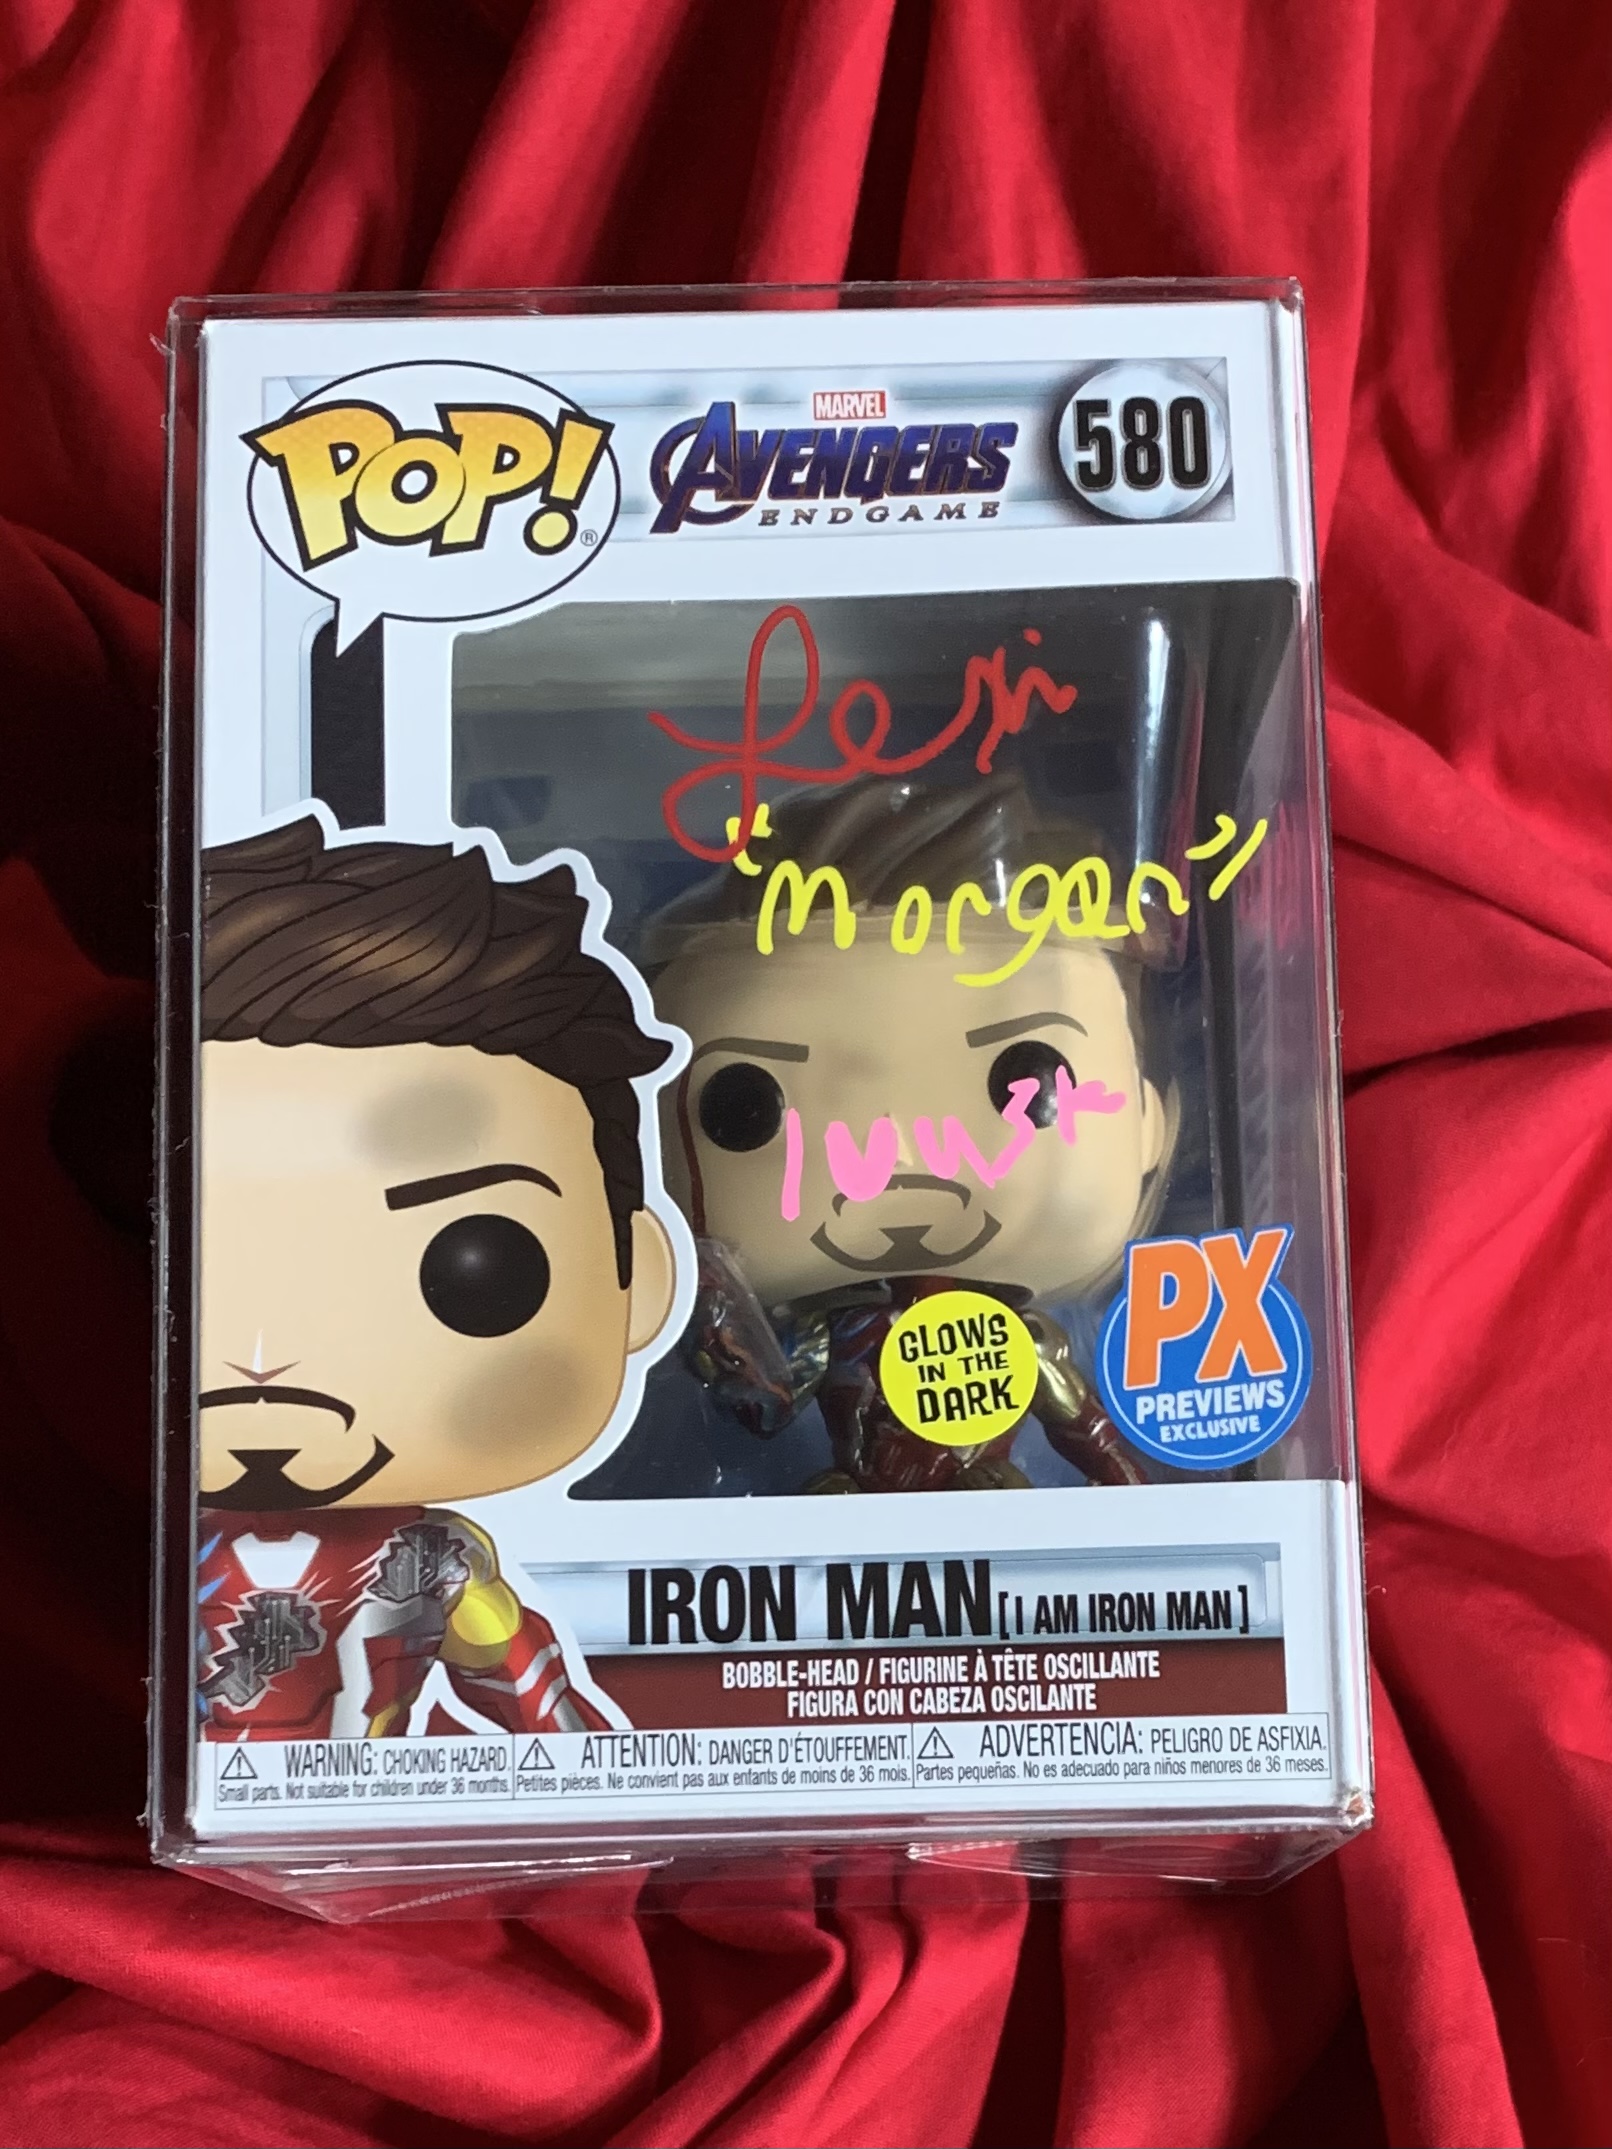 eksperimentel præmie Kamel Avengers Endgame~Iron Man (I am Iron Man)~Funko Pop #580 (PX glow in the  dark edition)~Signed by Lexi Rabe with “Morgan” and quote “I love (heart)  you 3k.” Includes JSA COA and USA